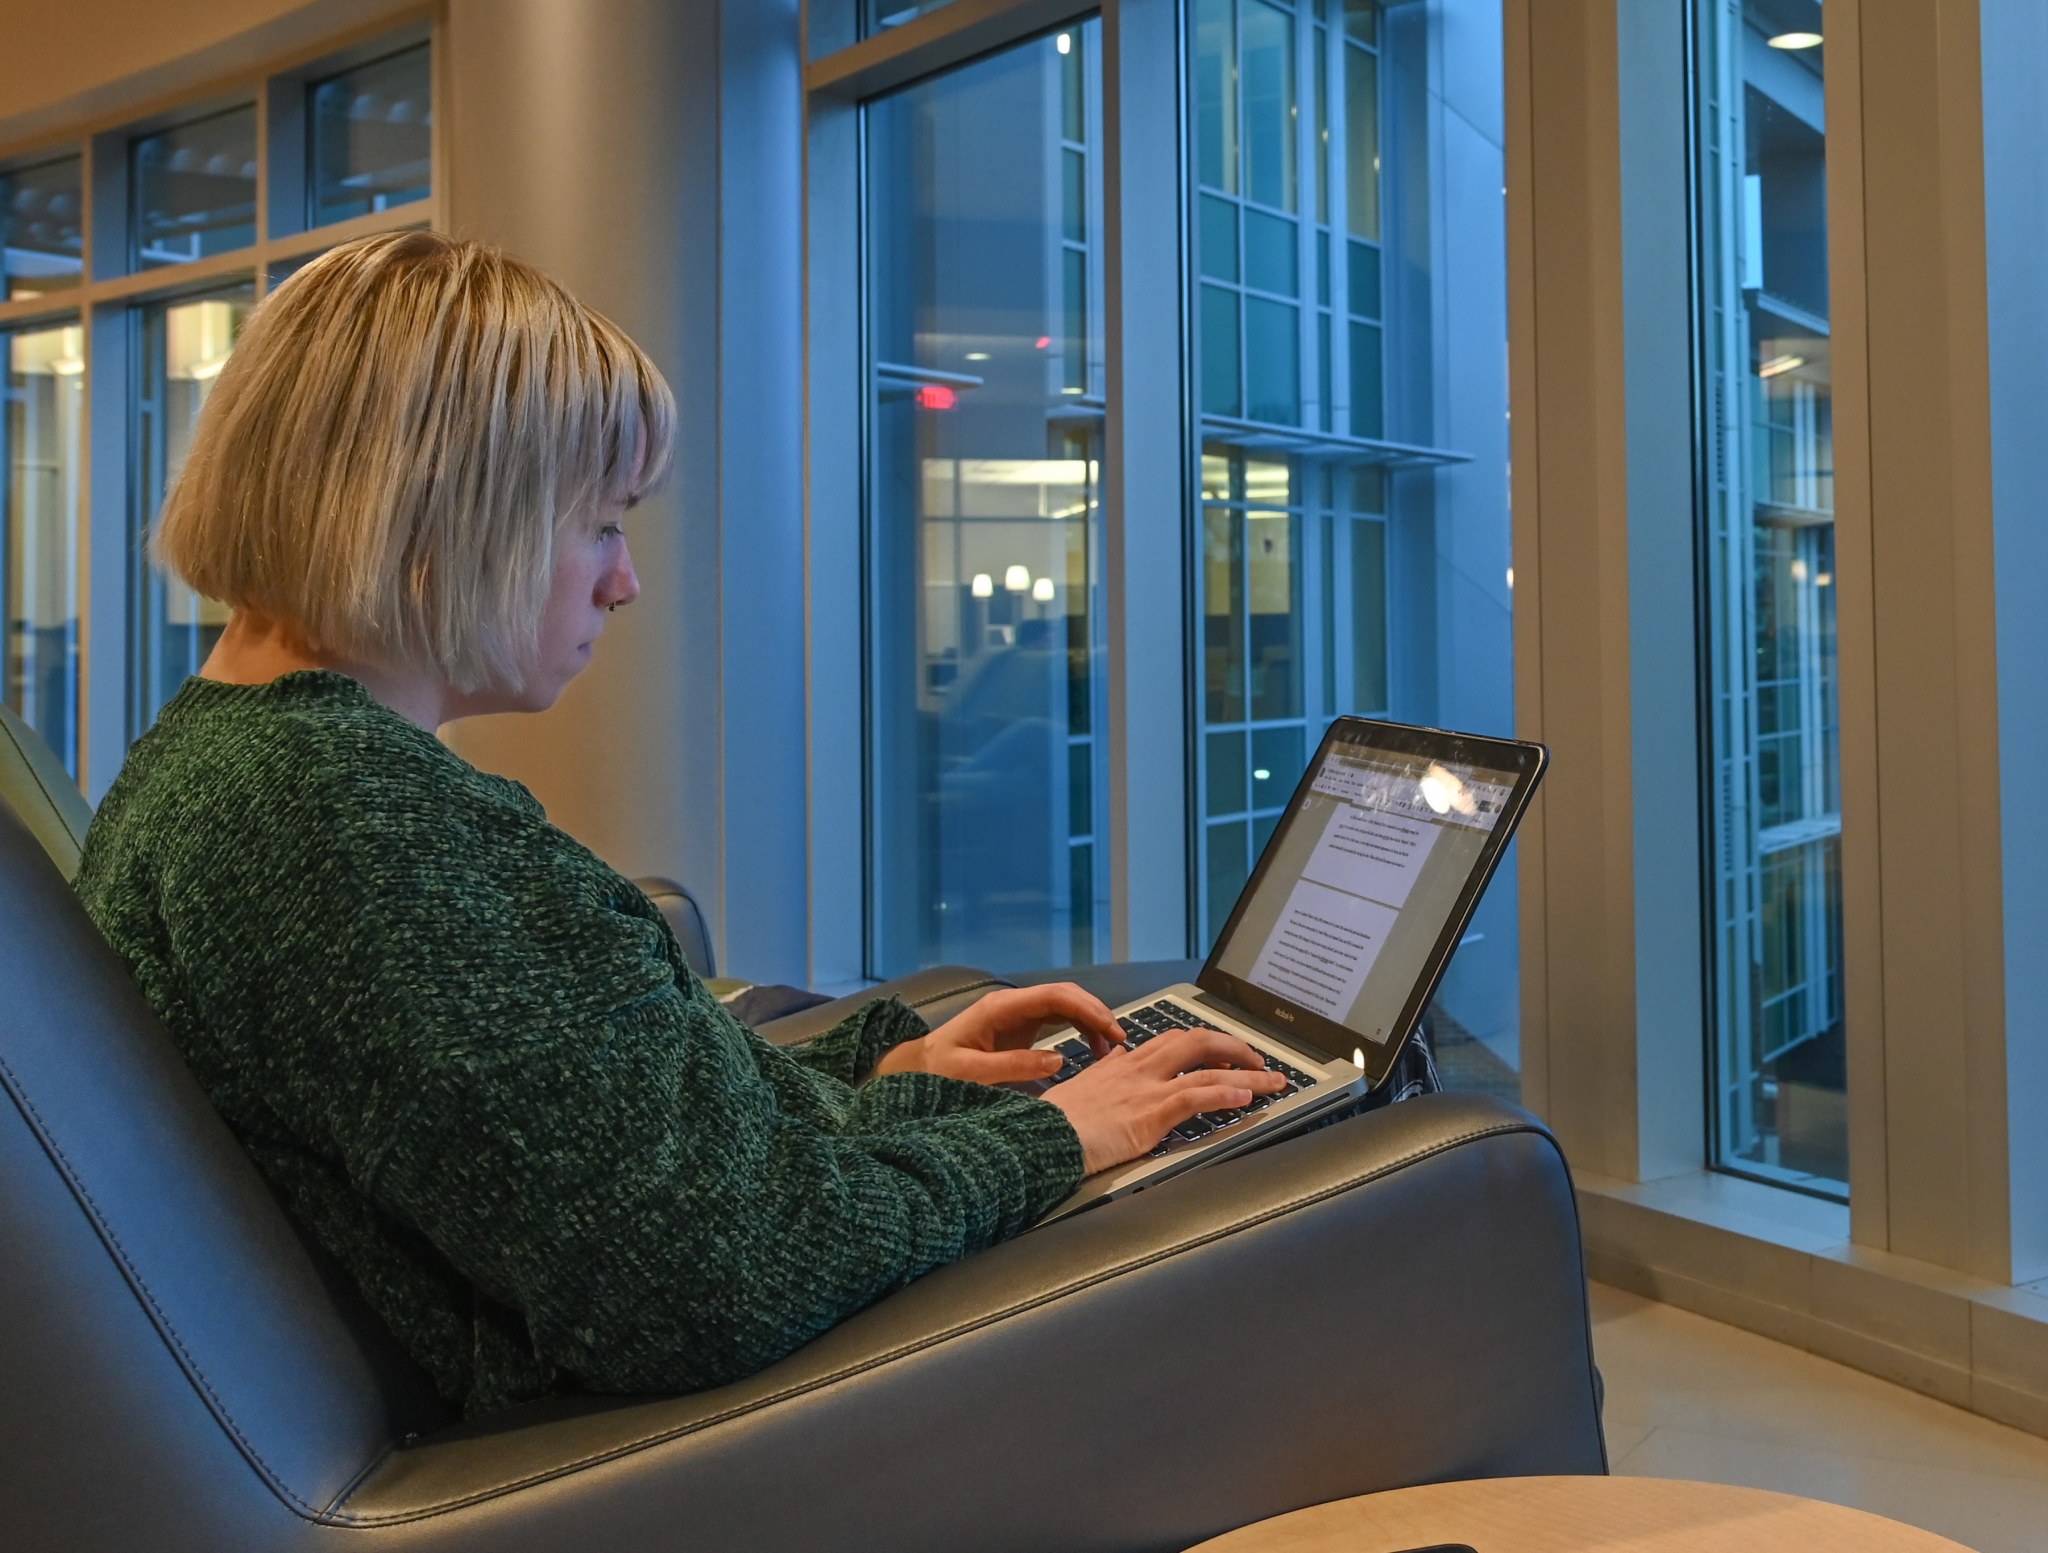 Blonde woman sitting in an easy chair in front of large windows with a laptop computer.